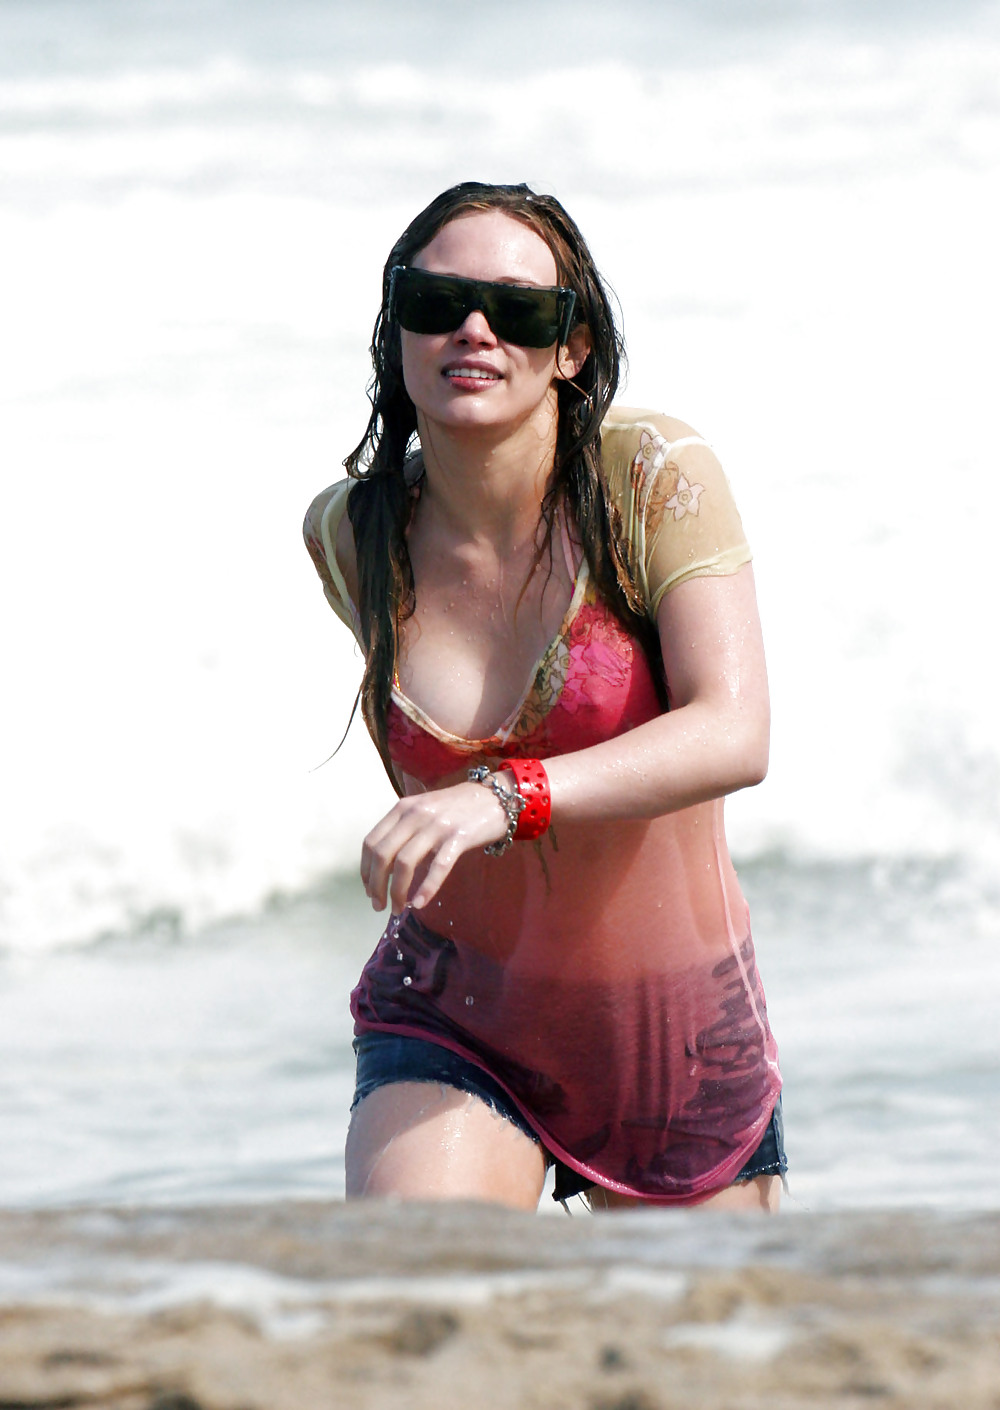 Hilary Duff at the Beach playing around in a wet shirt #7220981